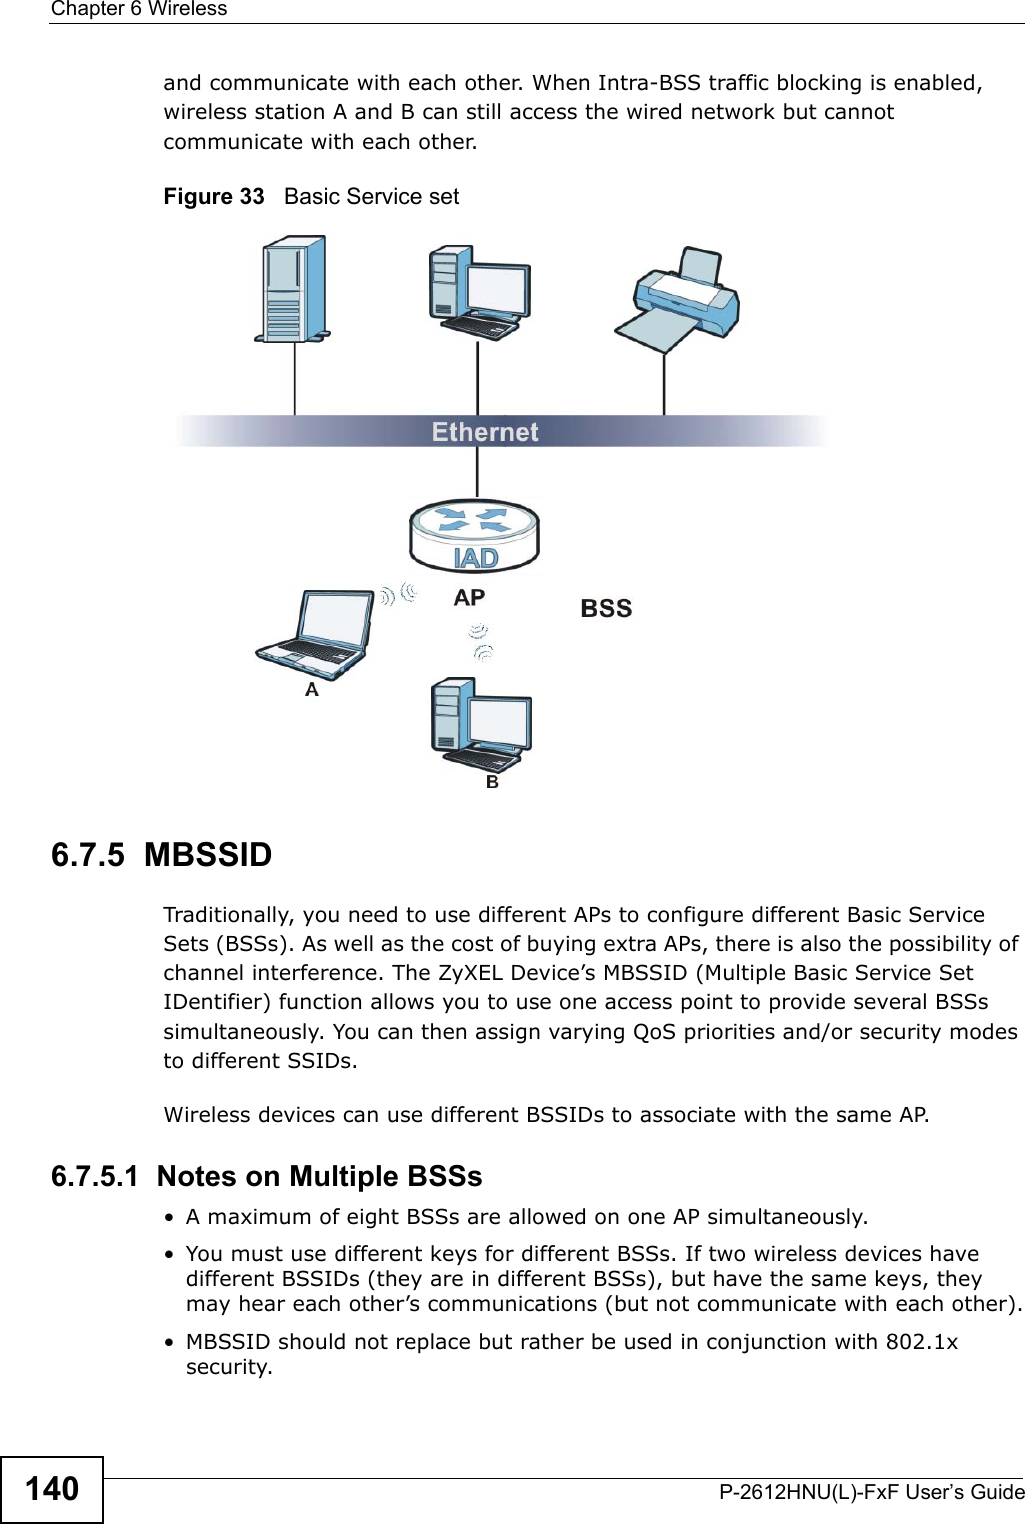 Chapter 6 WirelessP-2612HNU(L)-FxF User’s Guide140and communicate with each other. When Intra-BSS traffic blocking is enabled,wireless station A and B can still access the wired network but cannot communicate with each other.Figure 33   Basic Service set6.7.5  MBSSIDTraditionally, you need to use different APs to configure different Basic Service Sets (BSSs). As well as the cost of buying extra APs, there is also the possibility of channel interference. The ZyXEL Device’s MBSSID (Multiple Basic Service Set IDentifier) function allows you to use one access point to provide several BSSssimultaneously. You can then assign varying QoS priorities and/or security modesto different SSIDs.Wireless devices can use different BSSIDs to associate with the same AP.6.7.5.1  Notes on Multiple BSSs• A maximum of eight BSSs are allowed on one AP simultaneously.• You must use different keys for different BSSs. If two wireless devices havedifferent BSSIDs (they are in different BSSs), but have the same keys, they may hear each other’s communications (but not communicate with each other).• MBSSID should not replace but rather be used in conjunction with 802.1x security.